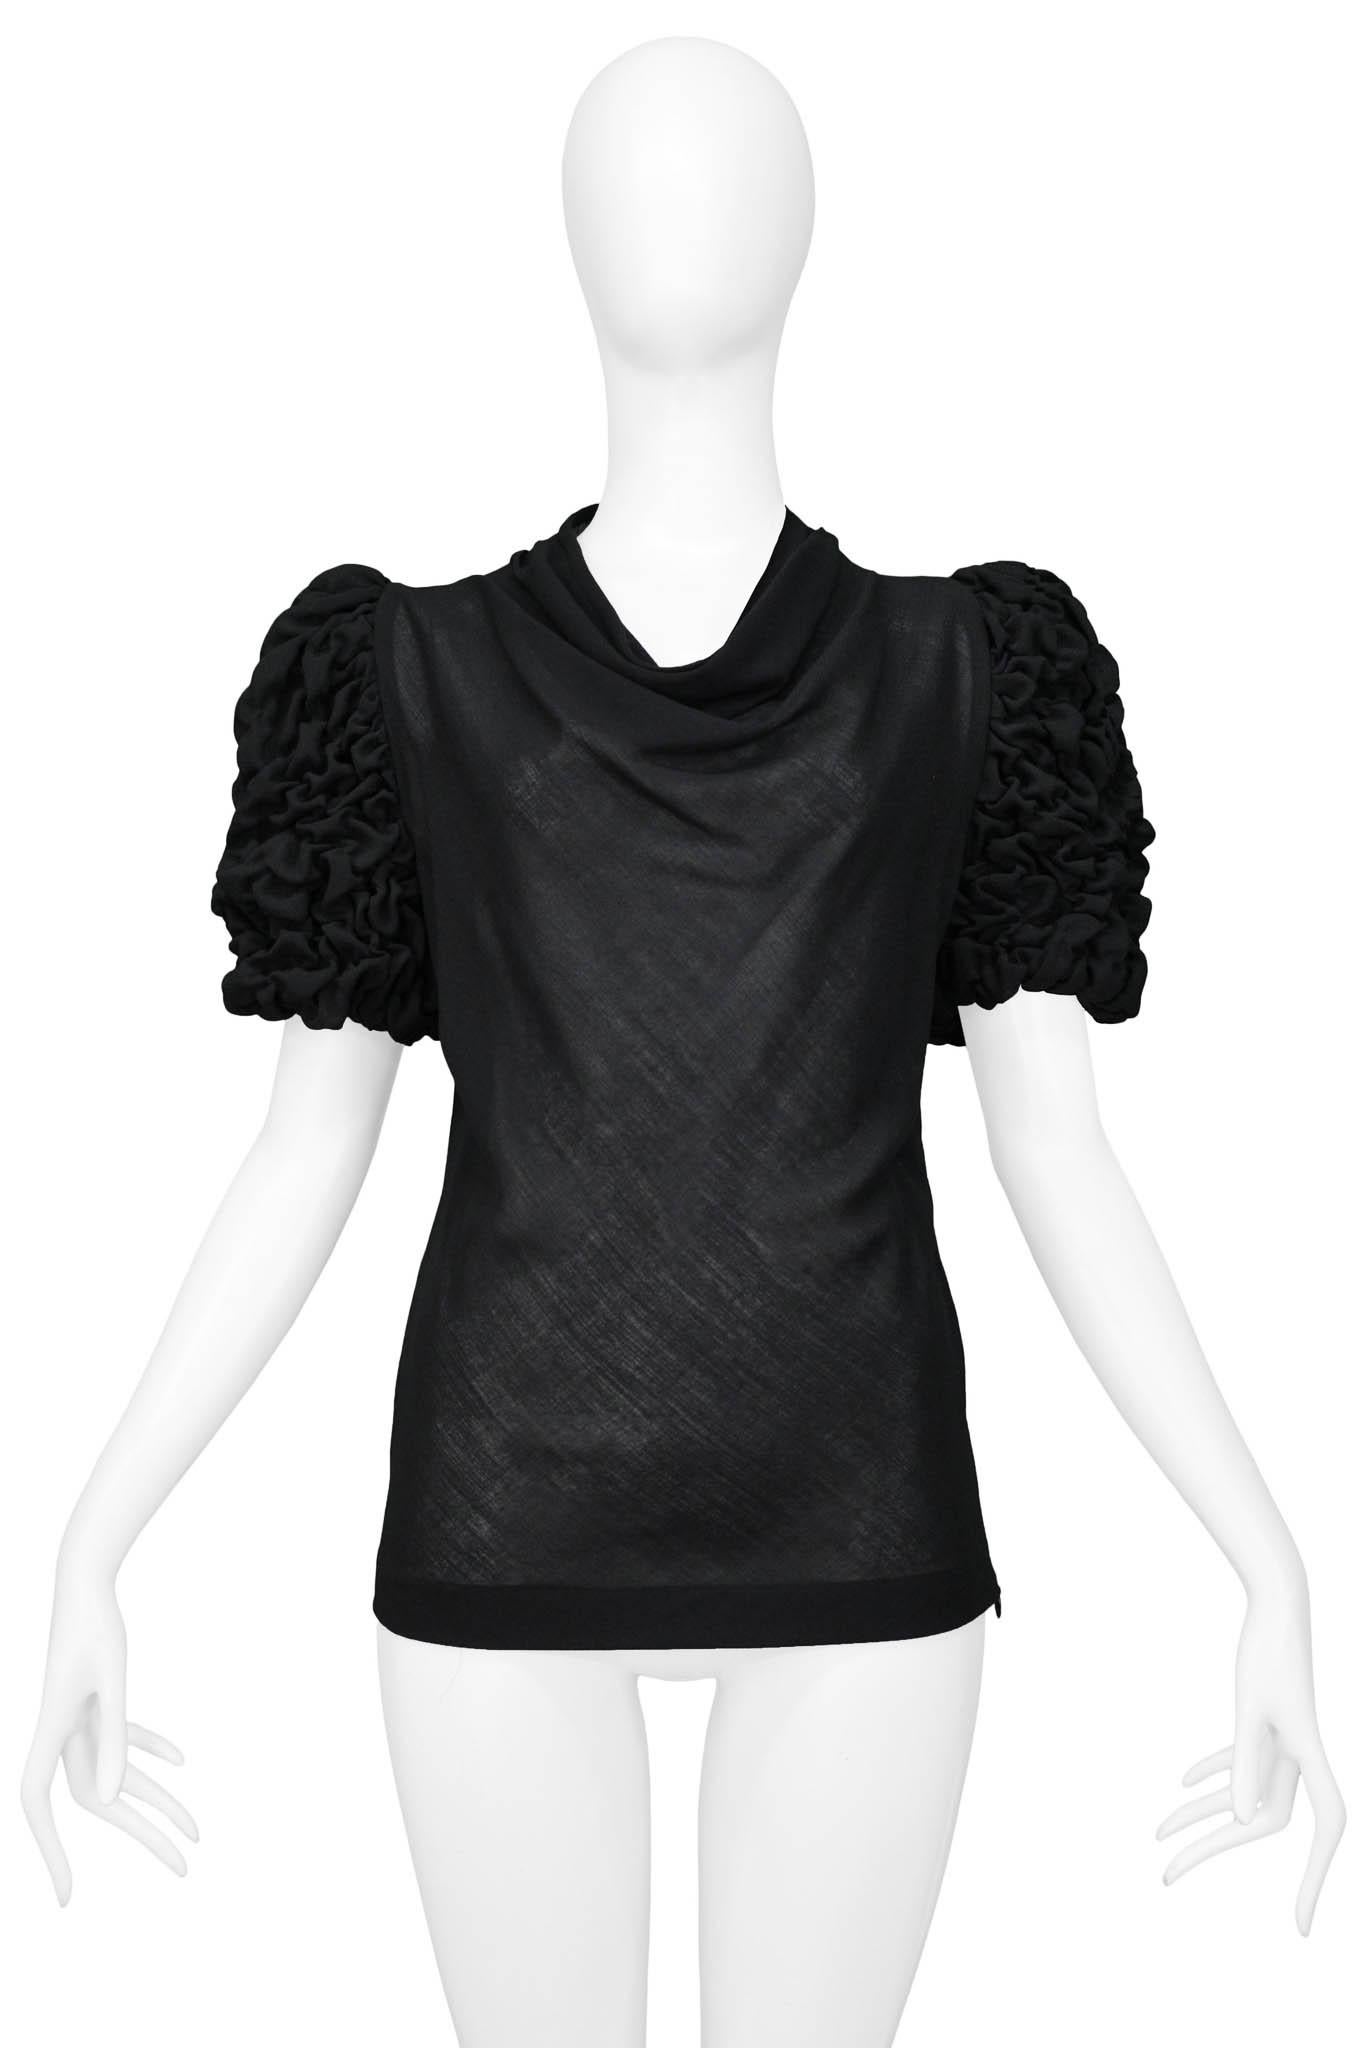 Resurrection Vintage is excited to offer an important Alexander McQueen black top featuring puckered sleeves, a draped pleated neckline, and an invisible zipper on the side seam.
Alexander McQueen
Size 40
Wool
AW 1999 The Overlock